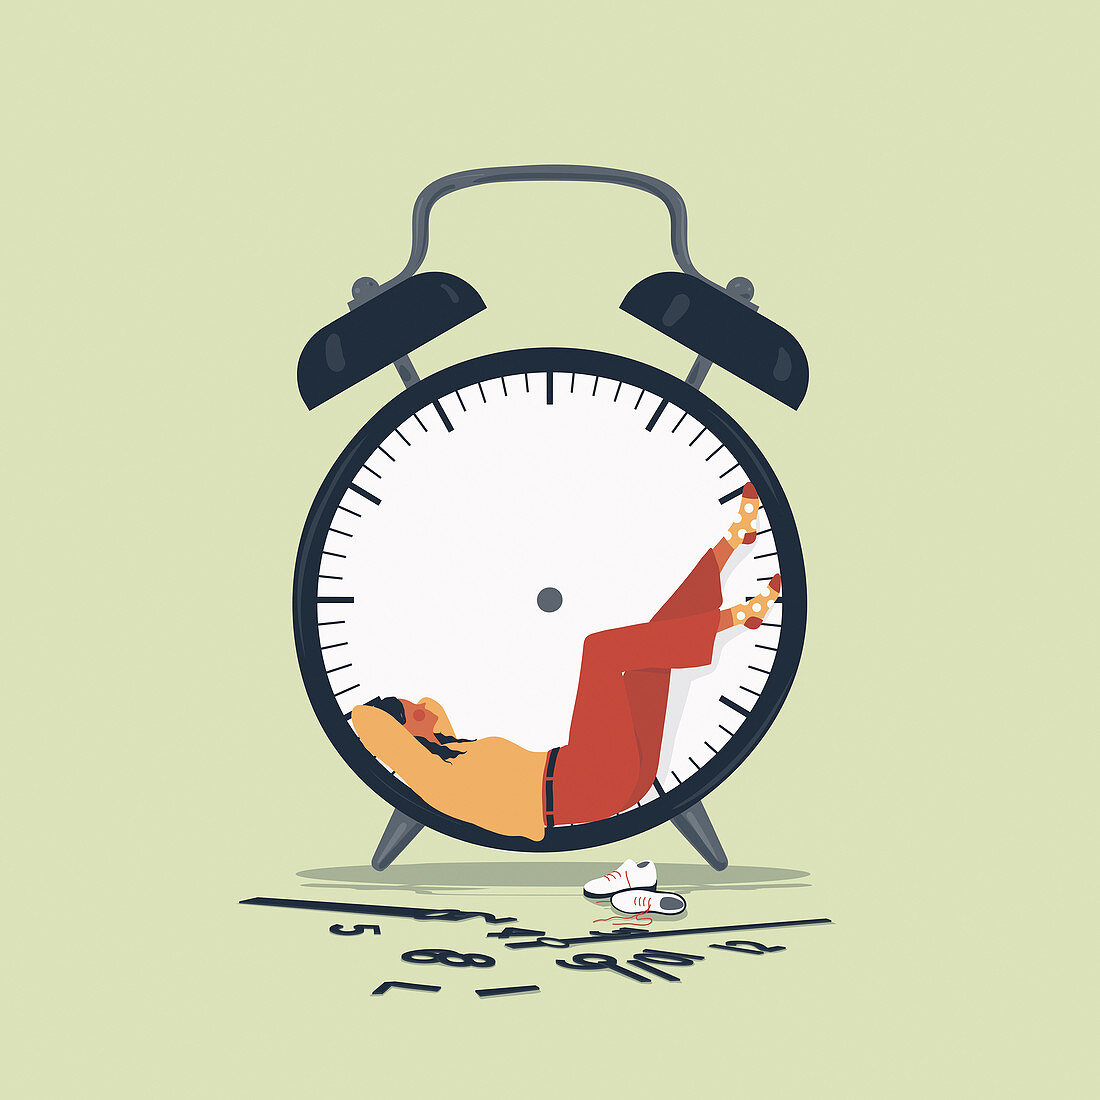 Woman relaxing inside of clock with no hands, illustration